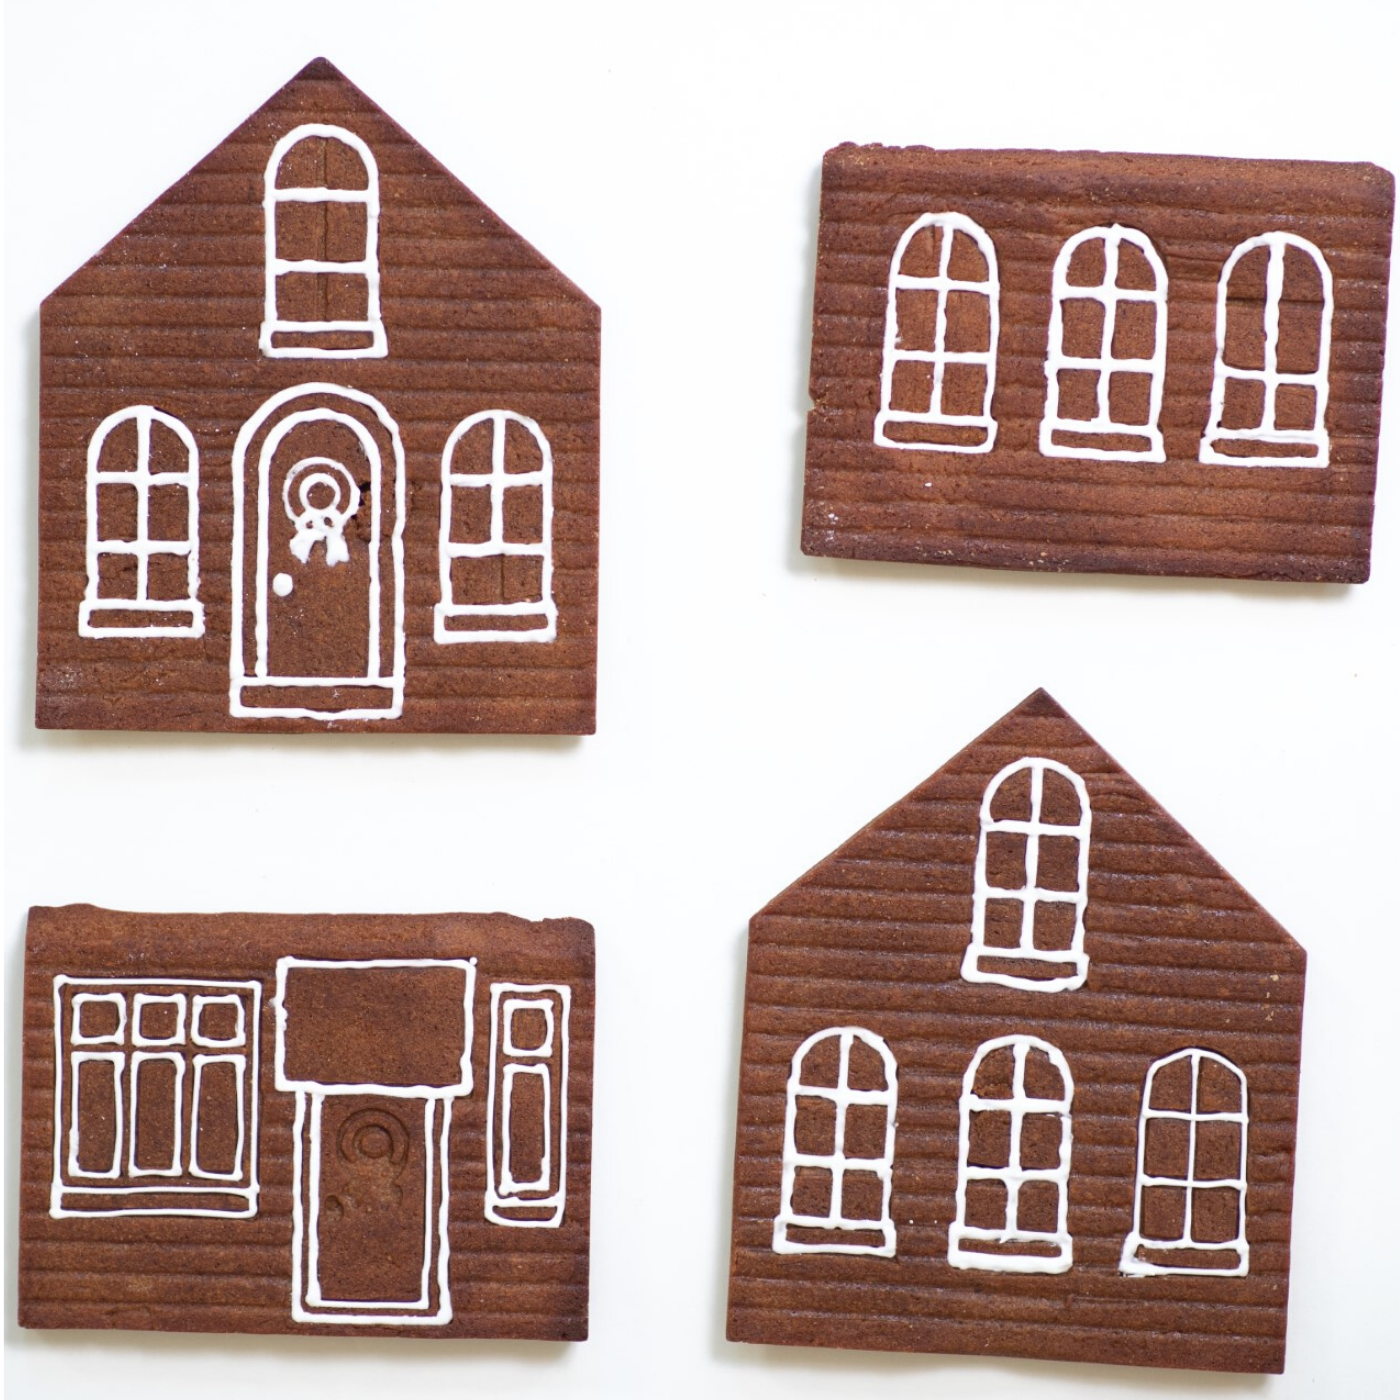  Make Your Own Gingerbread House Set